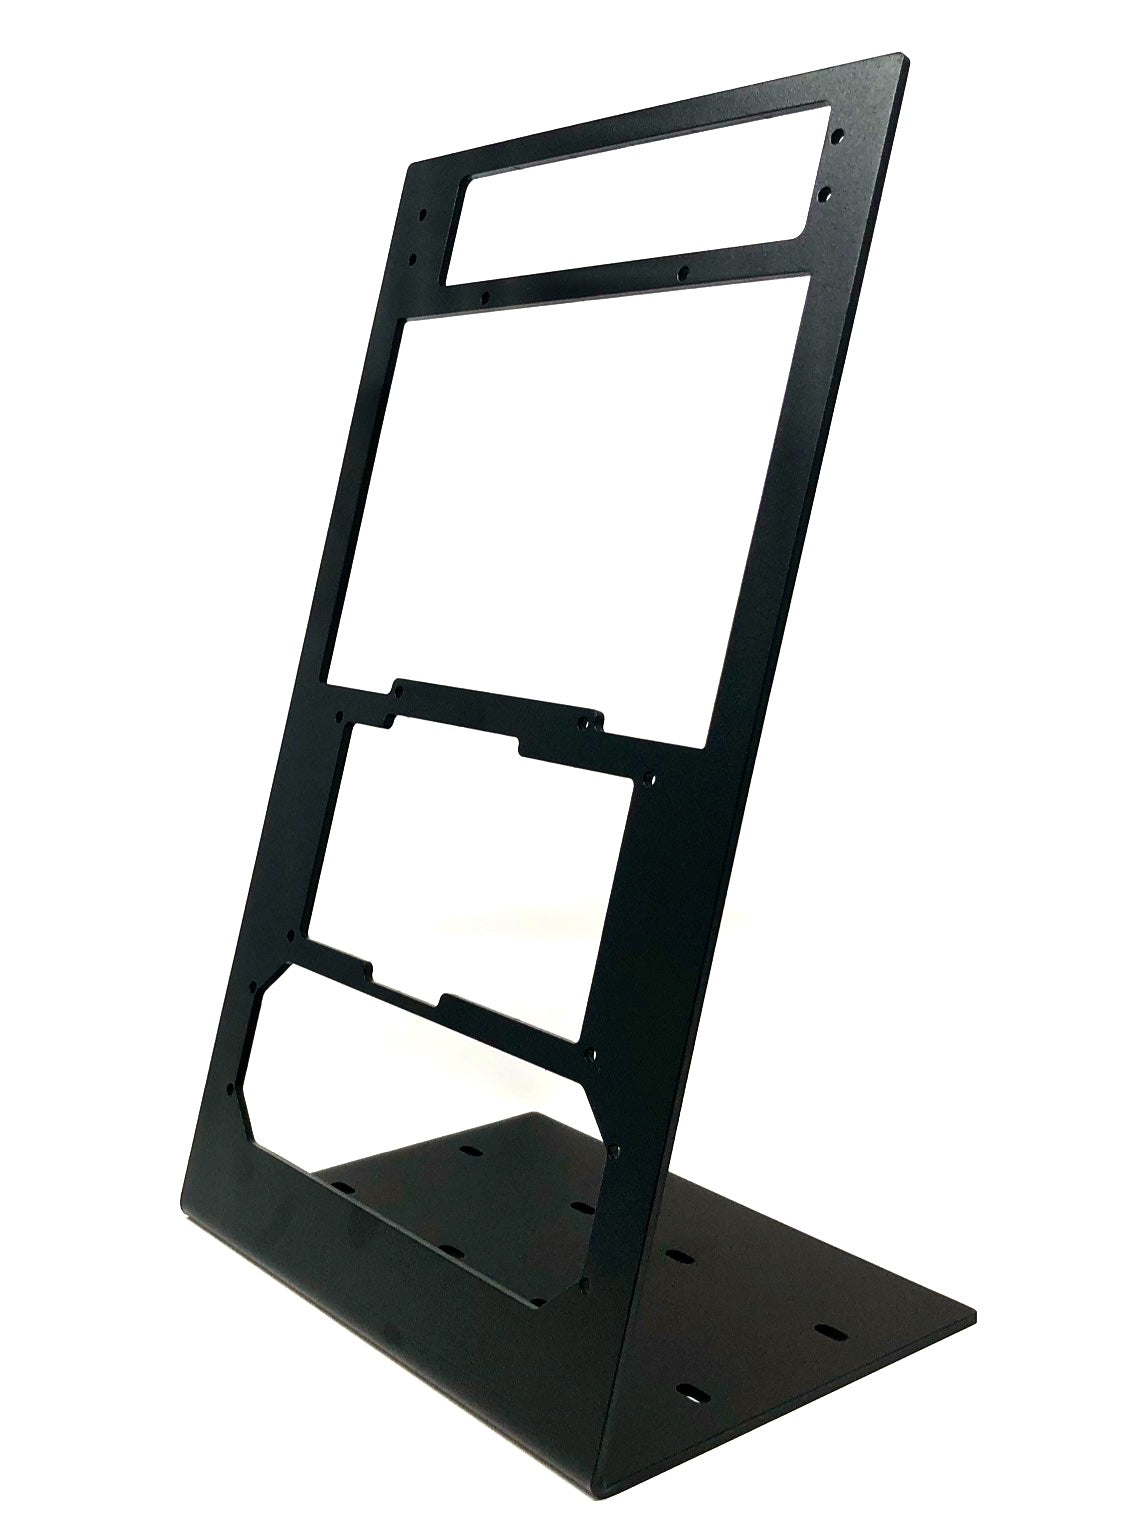 Desktop stand for RealSimGear GMA350 GNS530 GNS430 GFC500